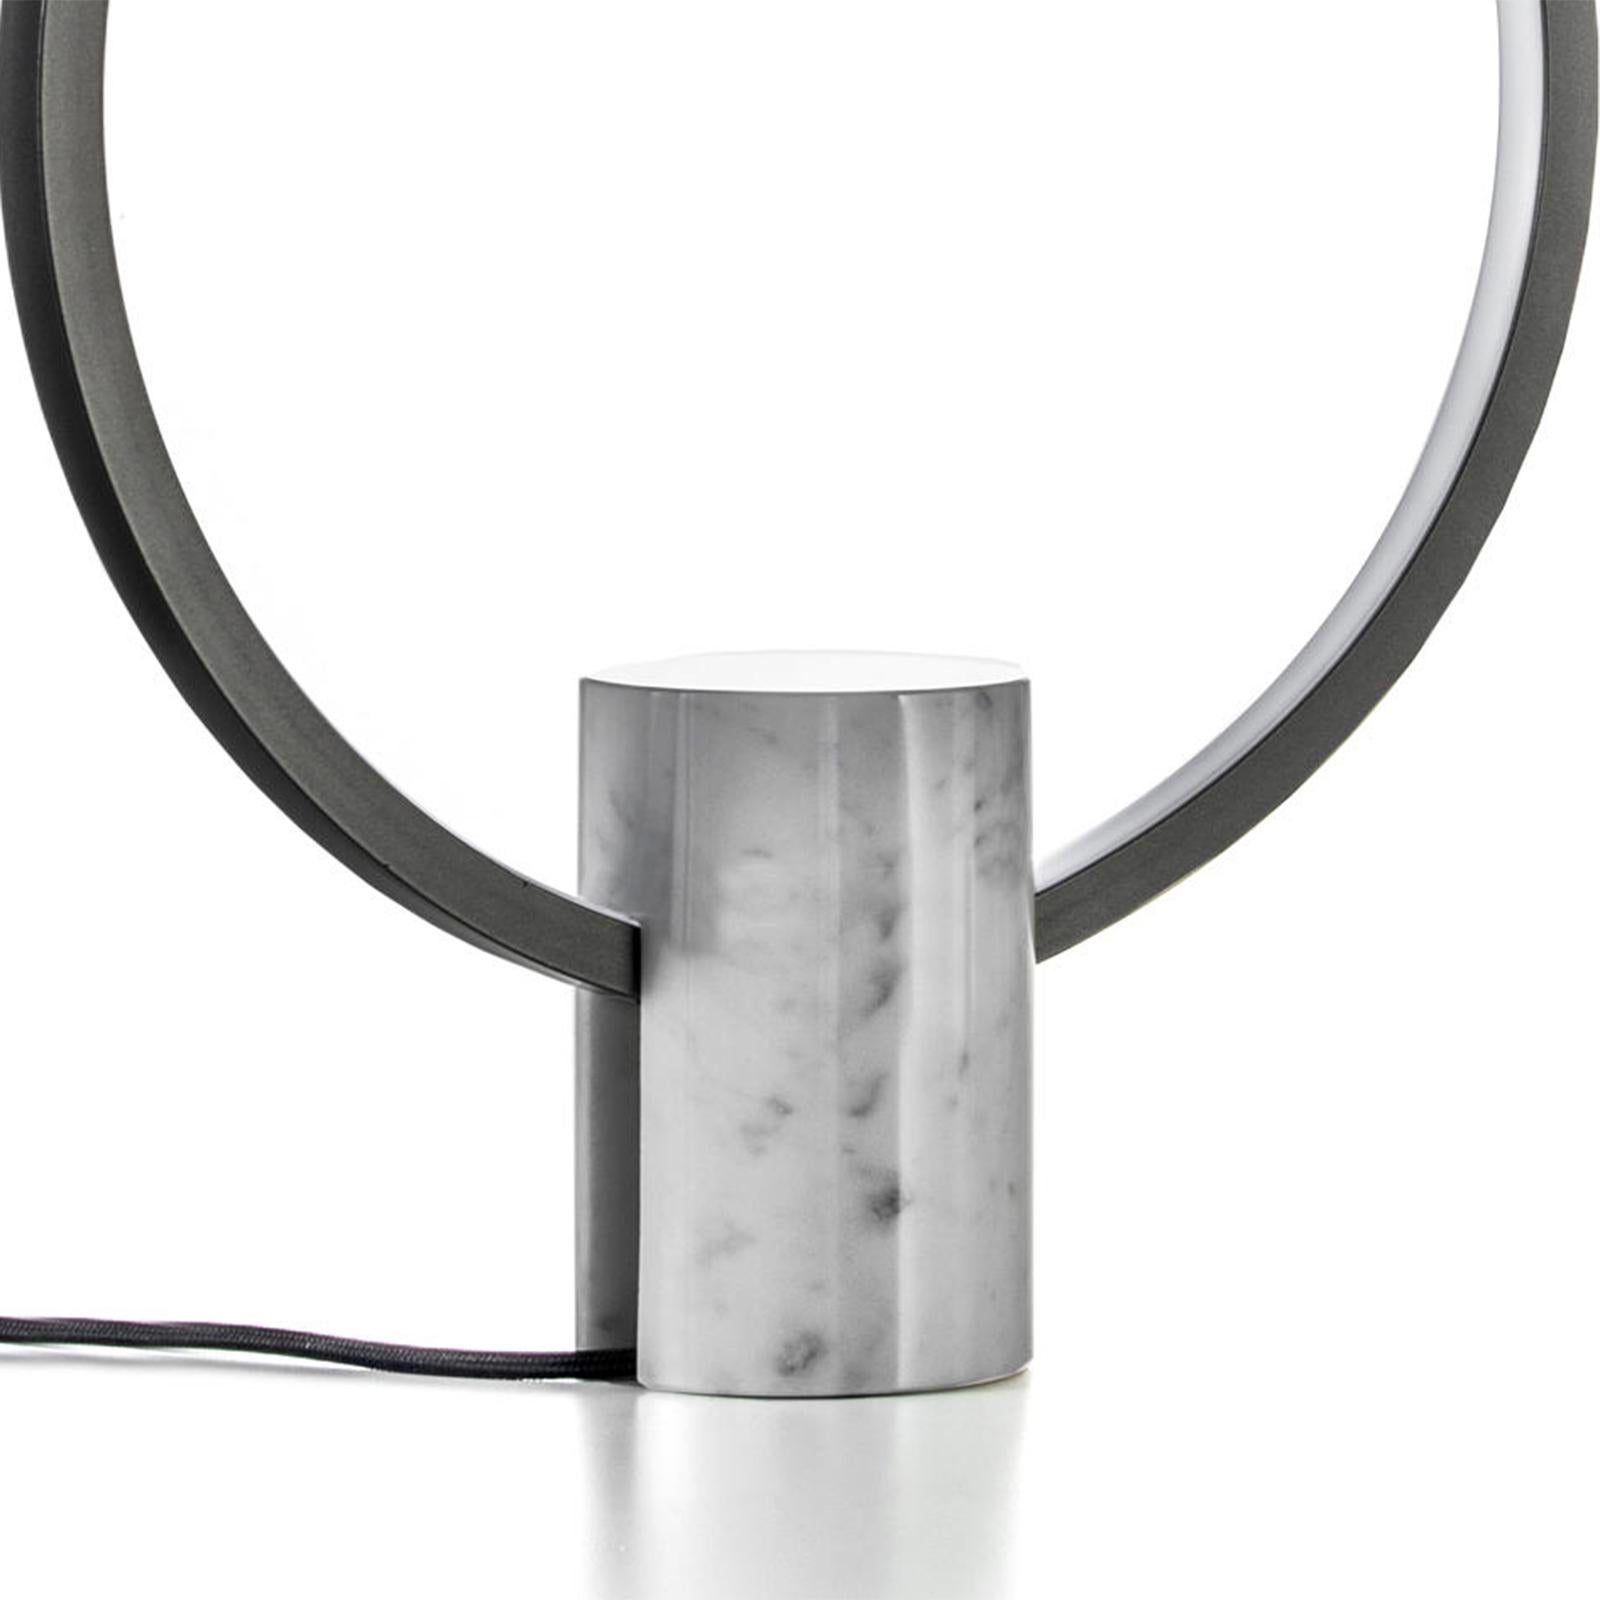 Table lamp Ring'N marble L with carrare white marble
base, with metal ring in tin finish. Ring include a dimmable
led lighting in 2700 Kalvin.
   